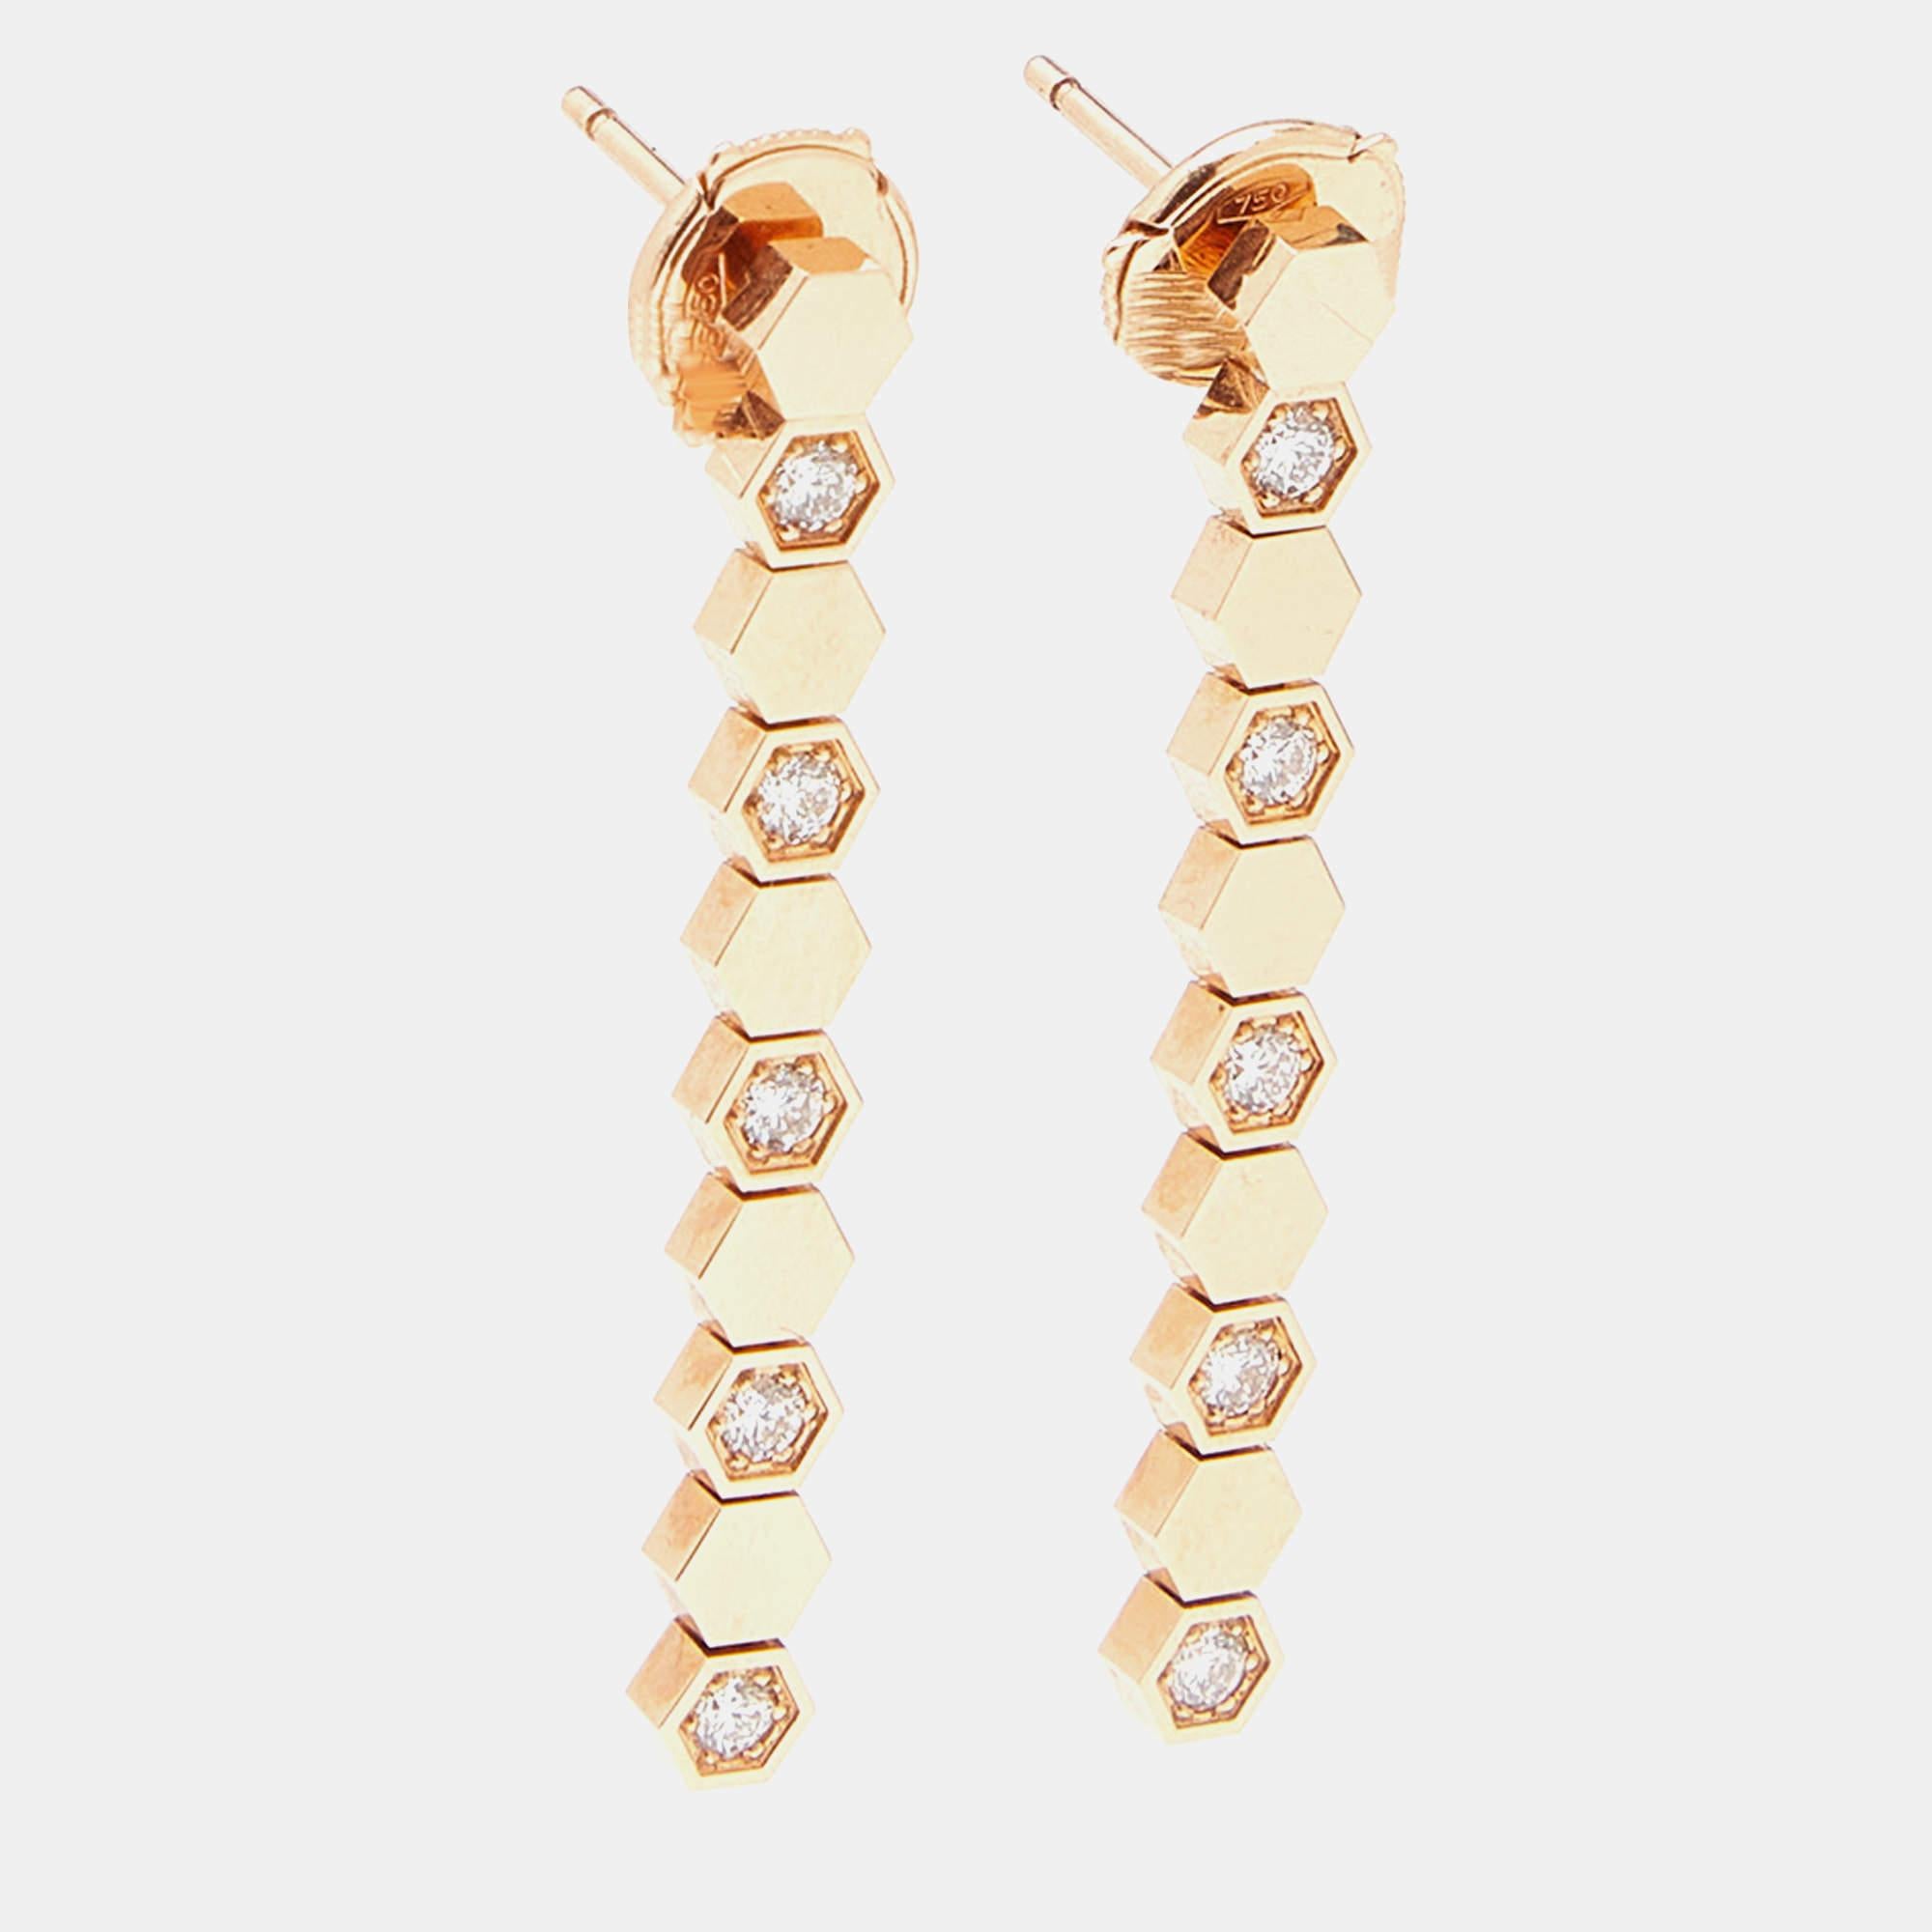 The Chaumet Bee My Love rarrings epitomize elegance. Crafted with precision, these earrings feature delicate 18k rose gold adorned with brilliant diamonds, forming a timeless union of sophistication and charm. A captivating blend of design and